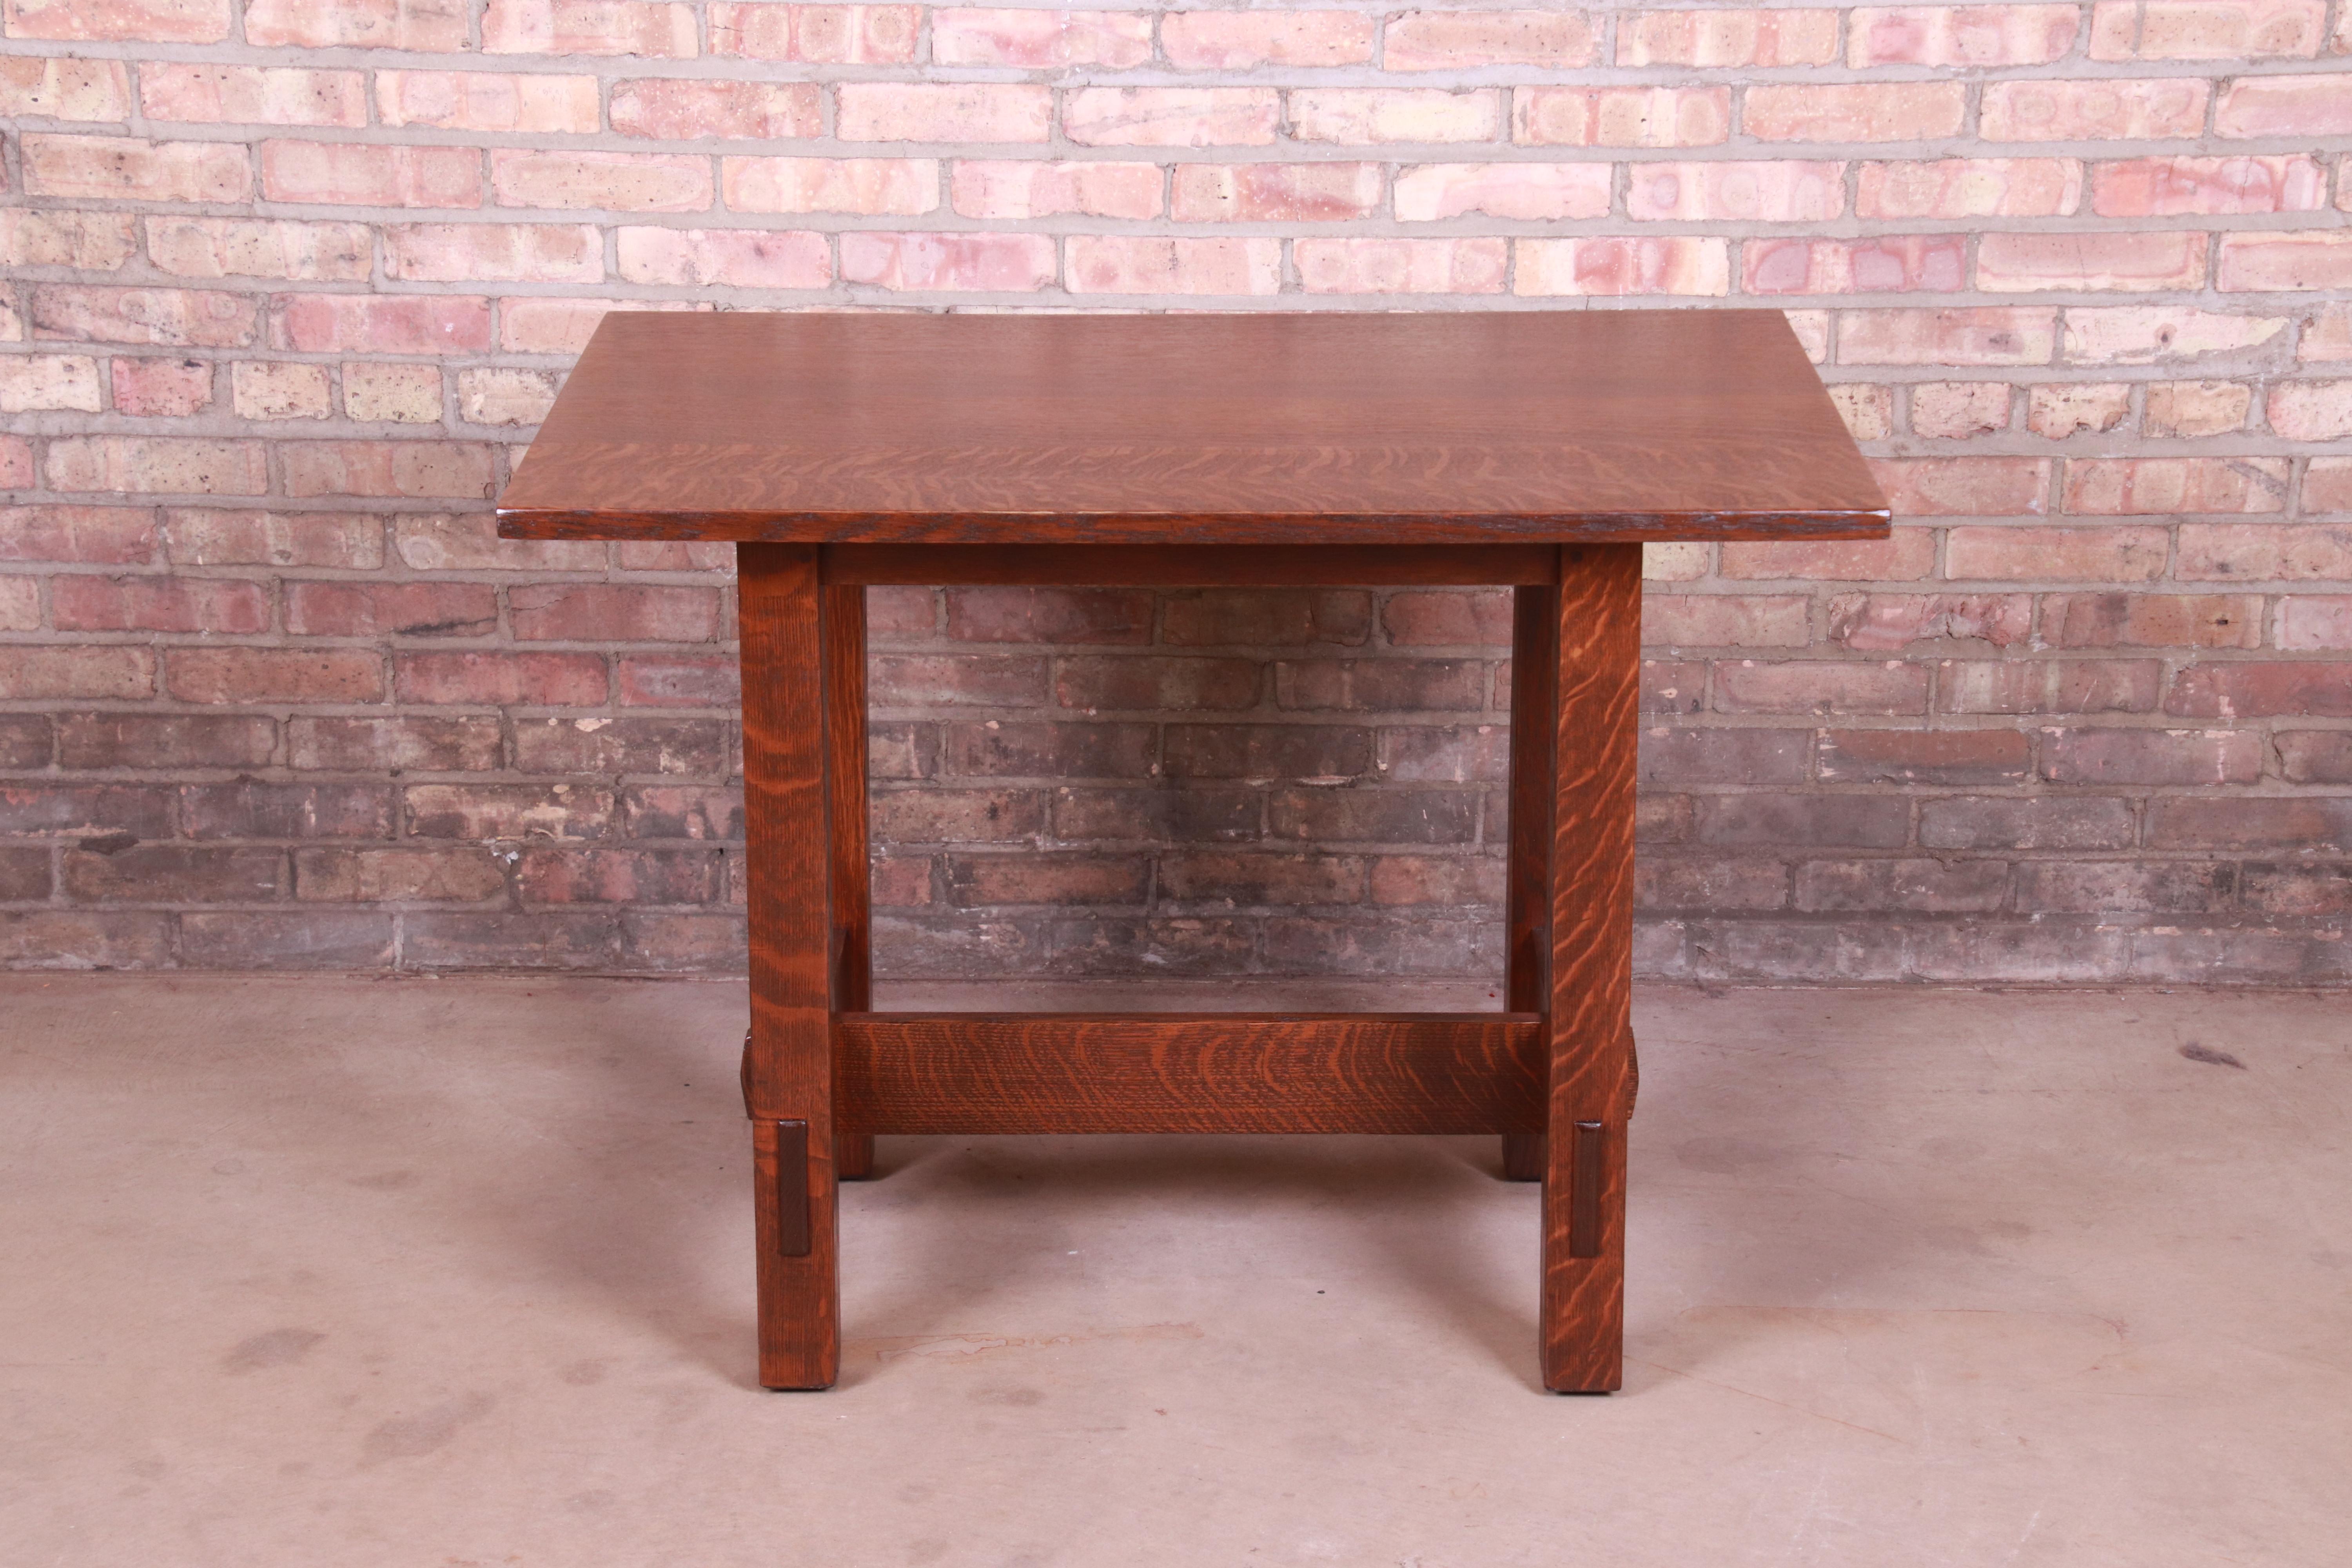 what aspects does this library table constructed in gustav stickley's craftsman workshop show